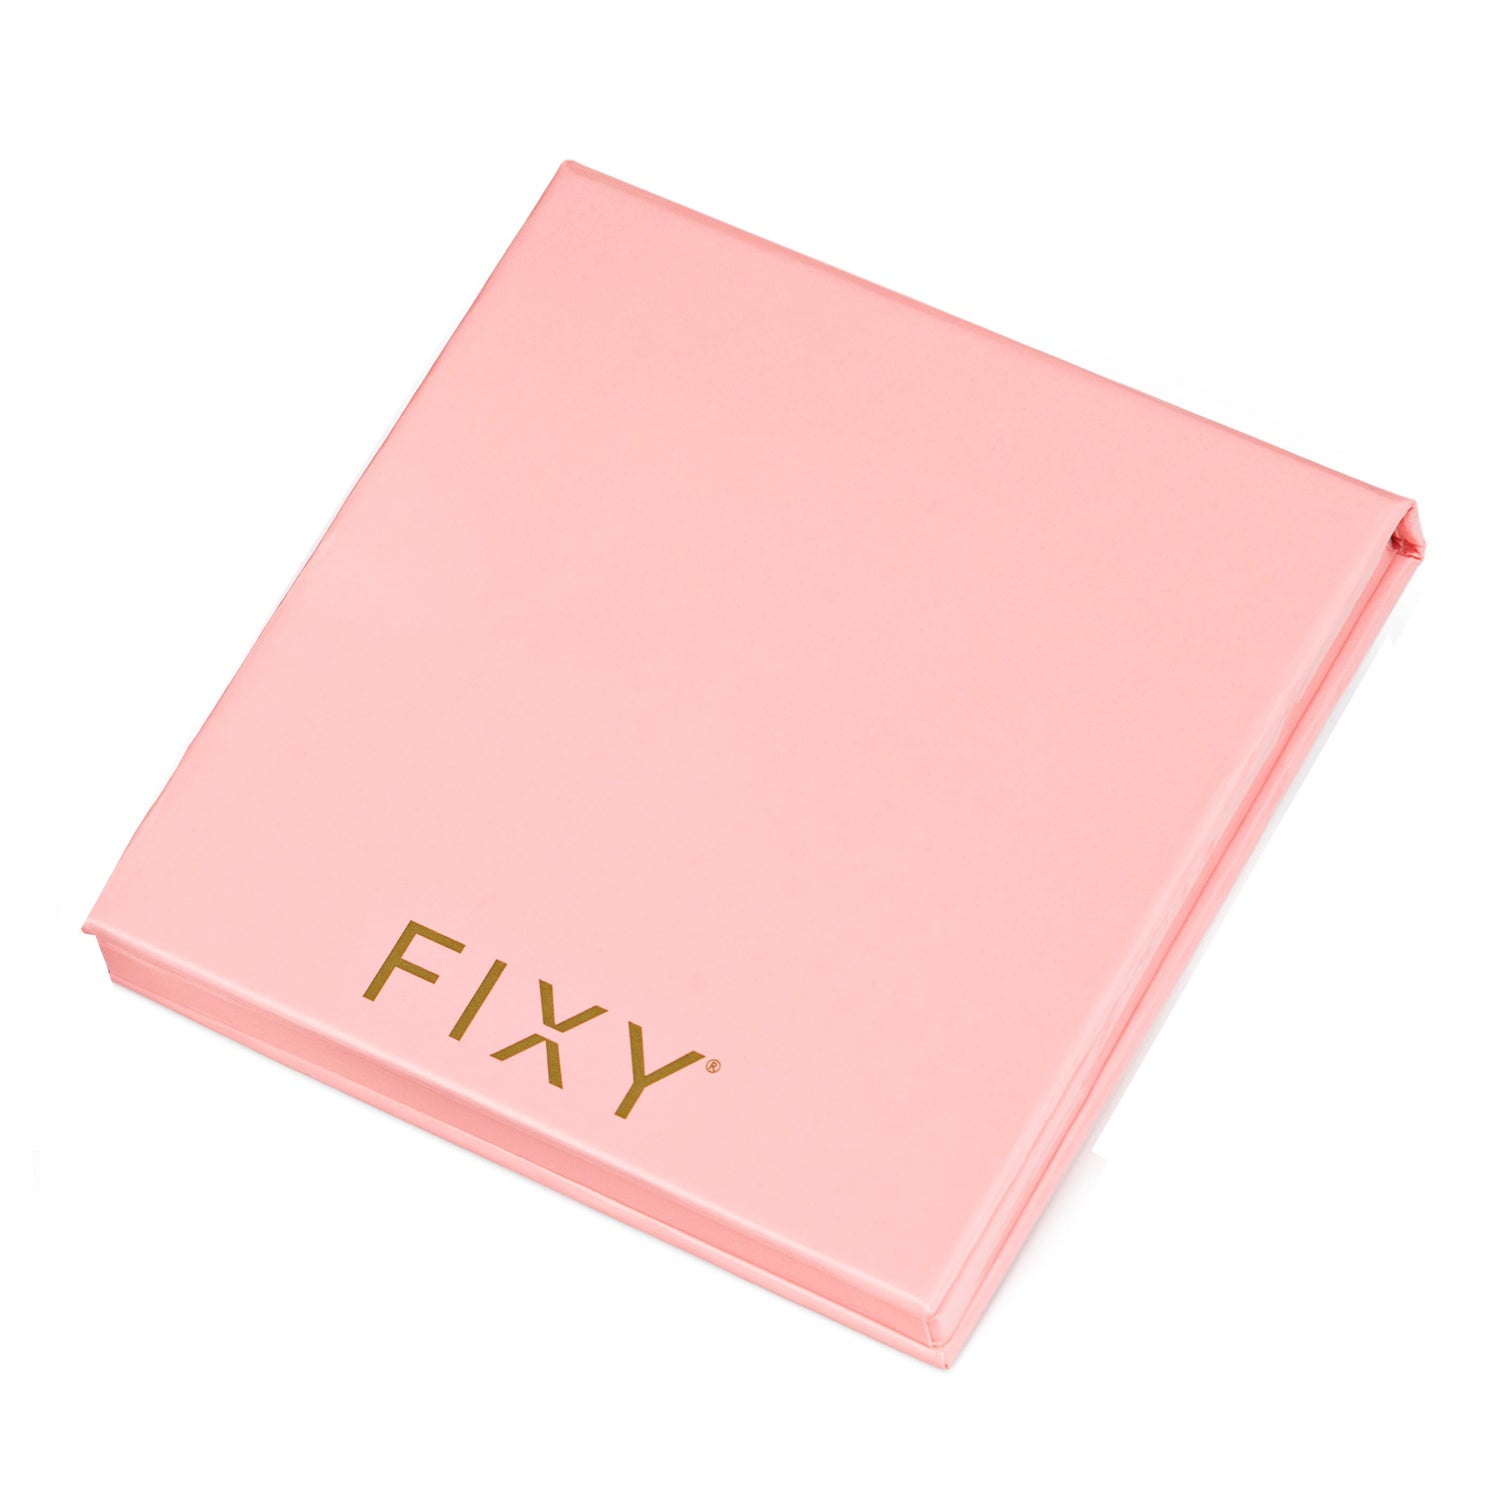 FIXY Small magnetic makeup palette